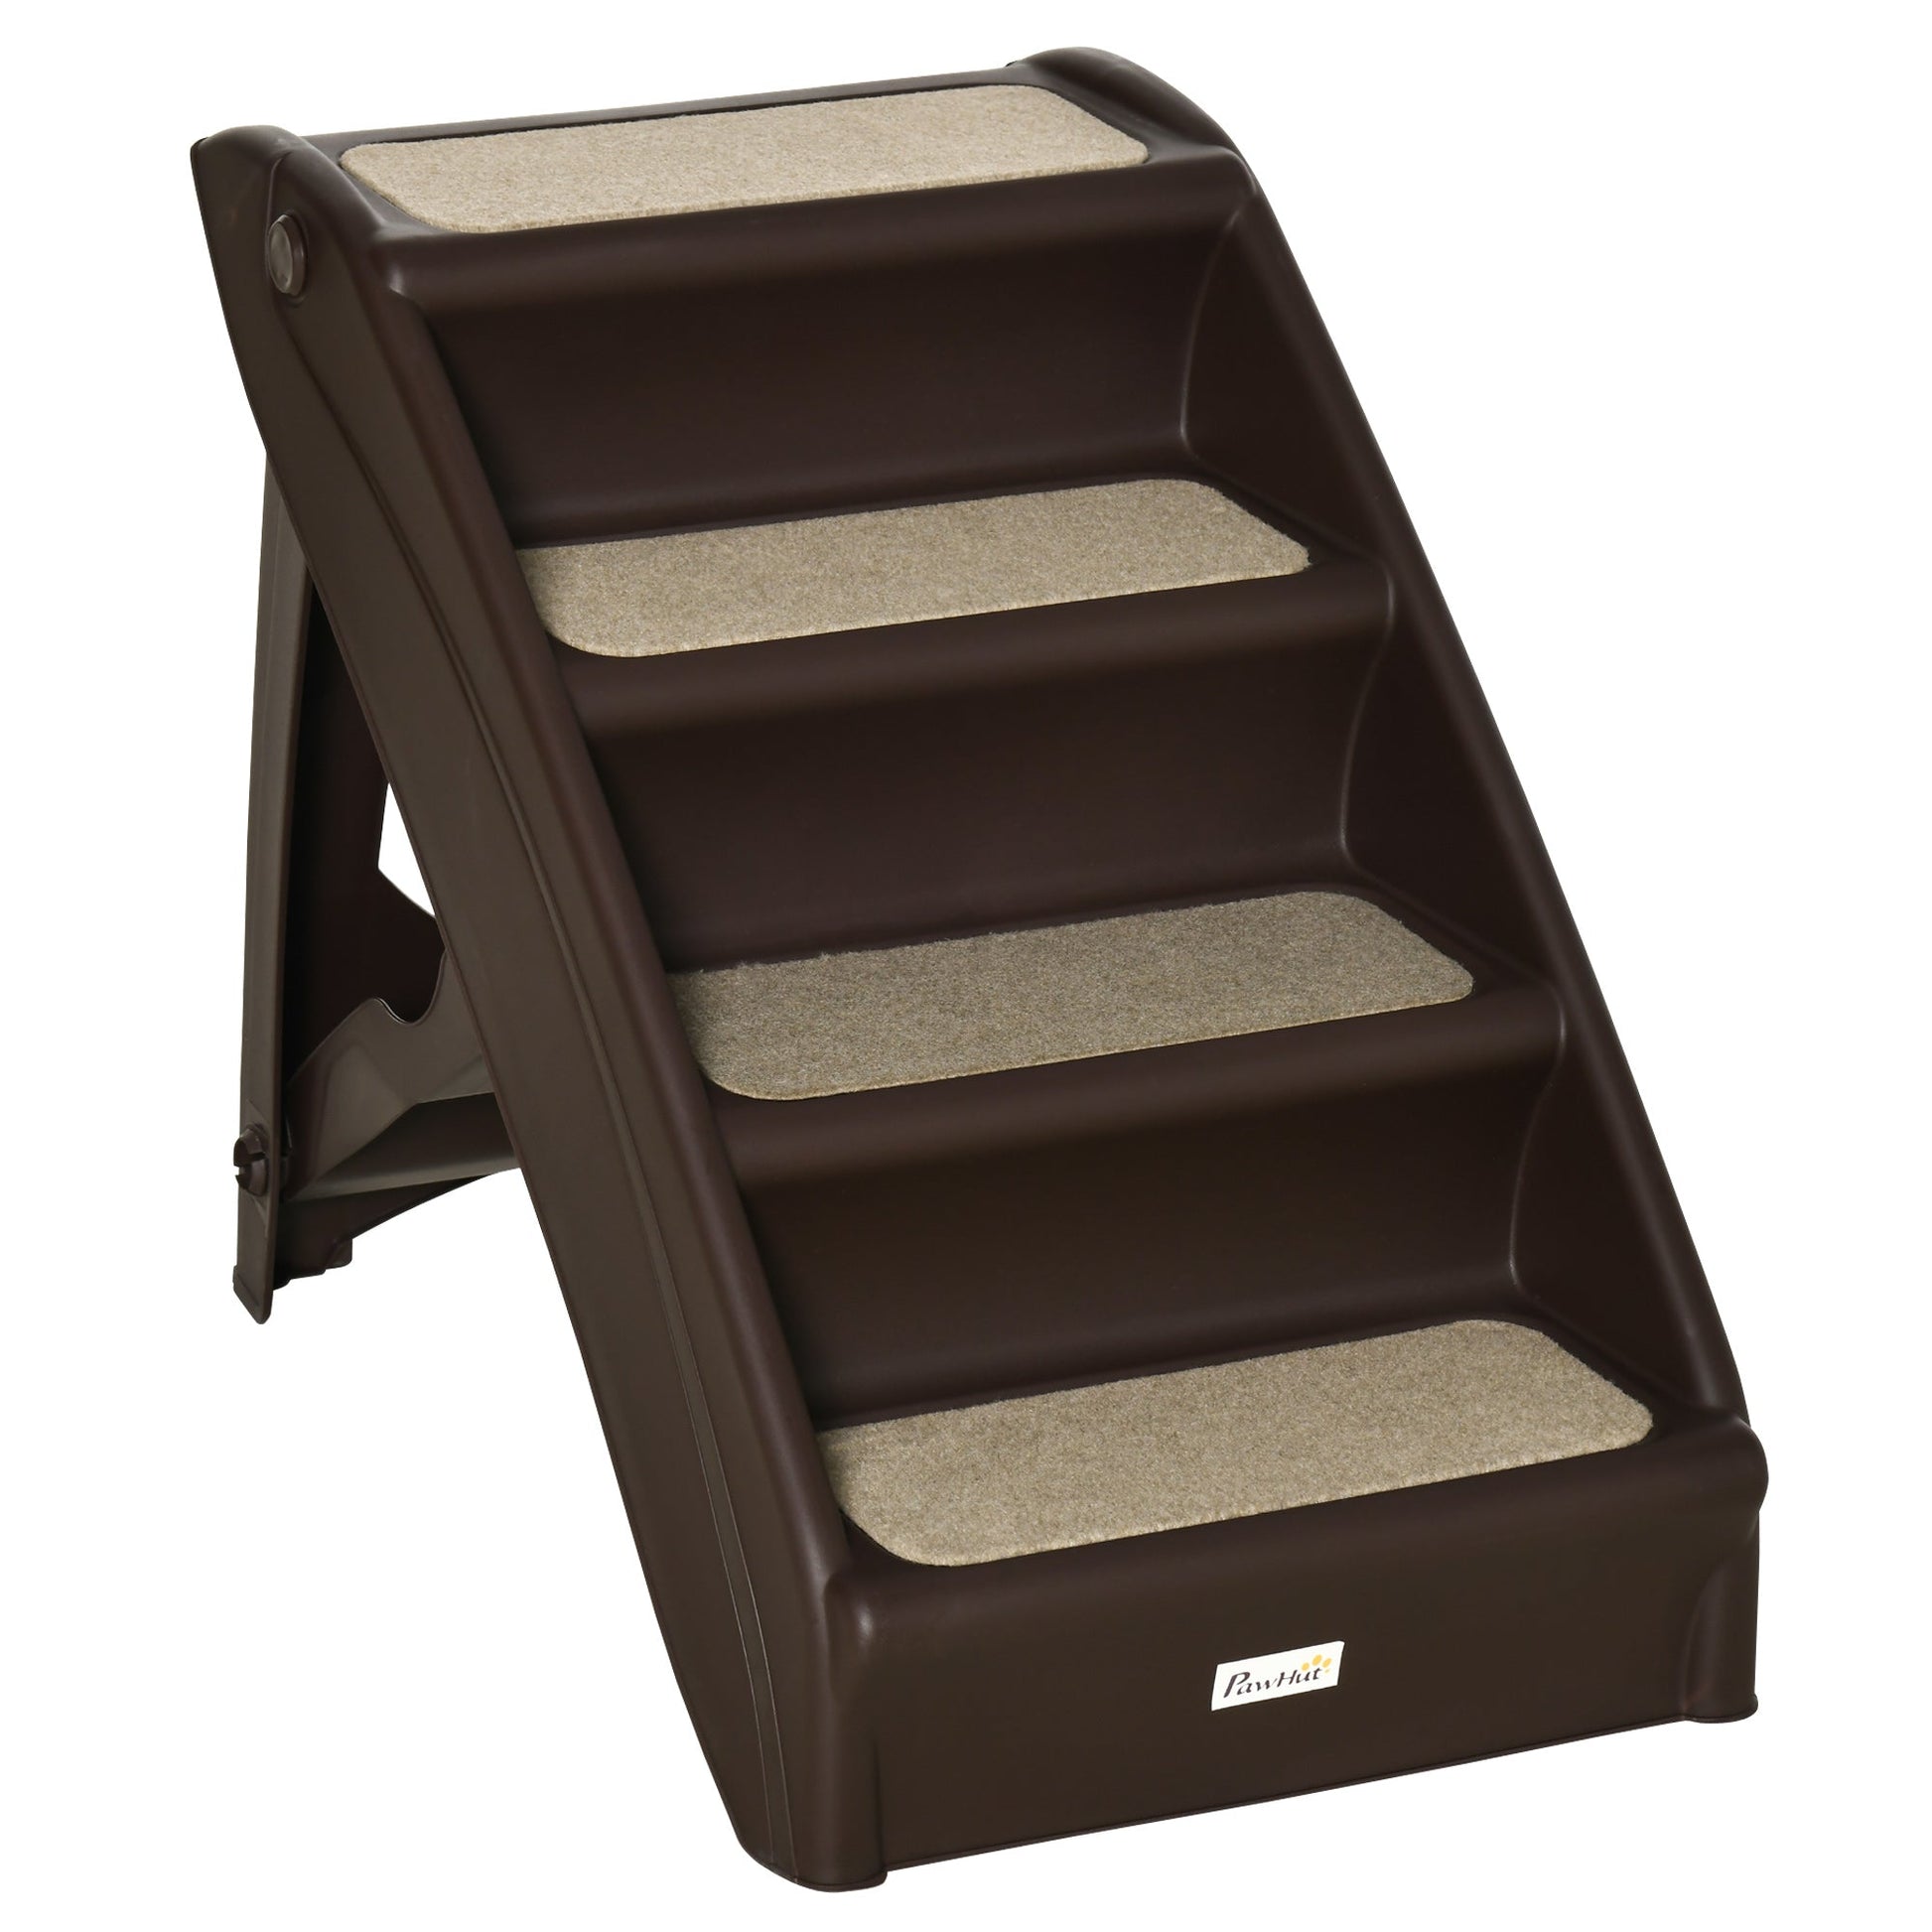 4-Level Portable Pet Stairs, Foldable Dog Ramp, Lightweight Cat Steps, with Nonslip Soft Mats, for High Bed, Sofa, Up to 44 lbs, Dark Brown at Gallery Canada